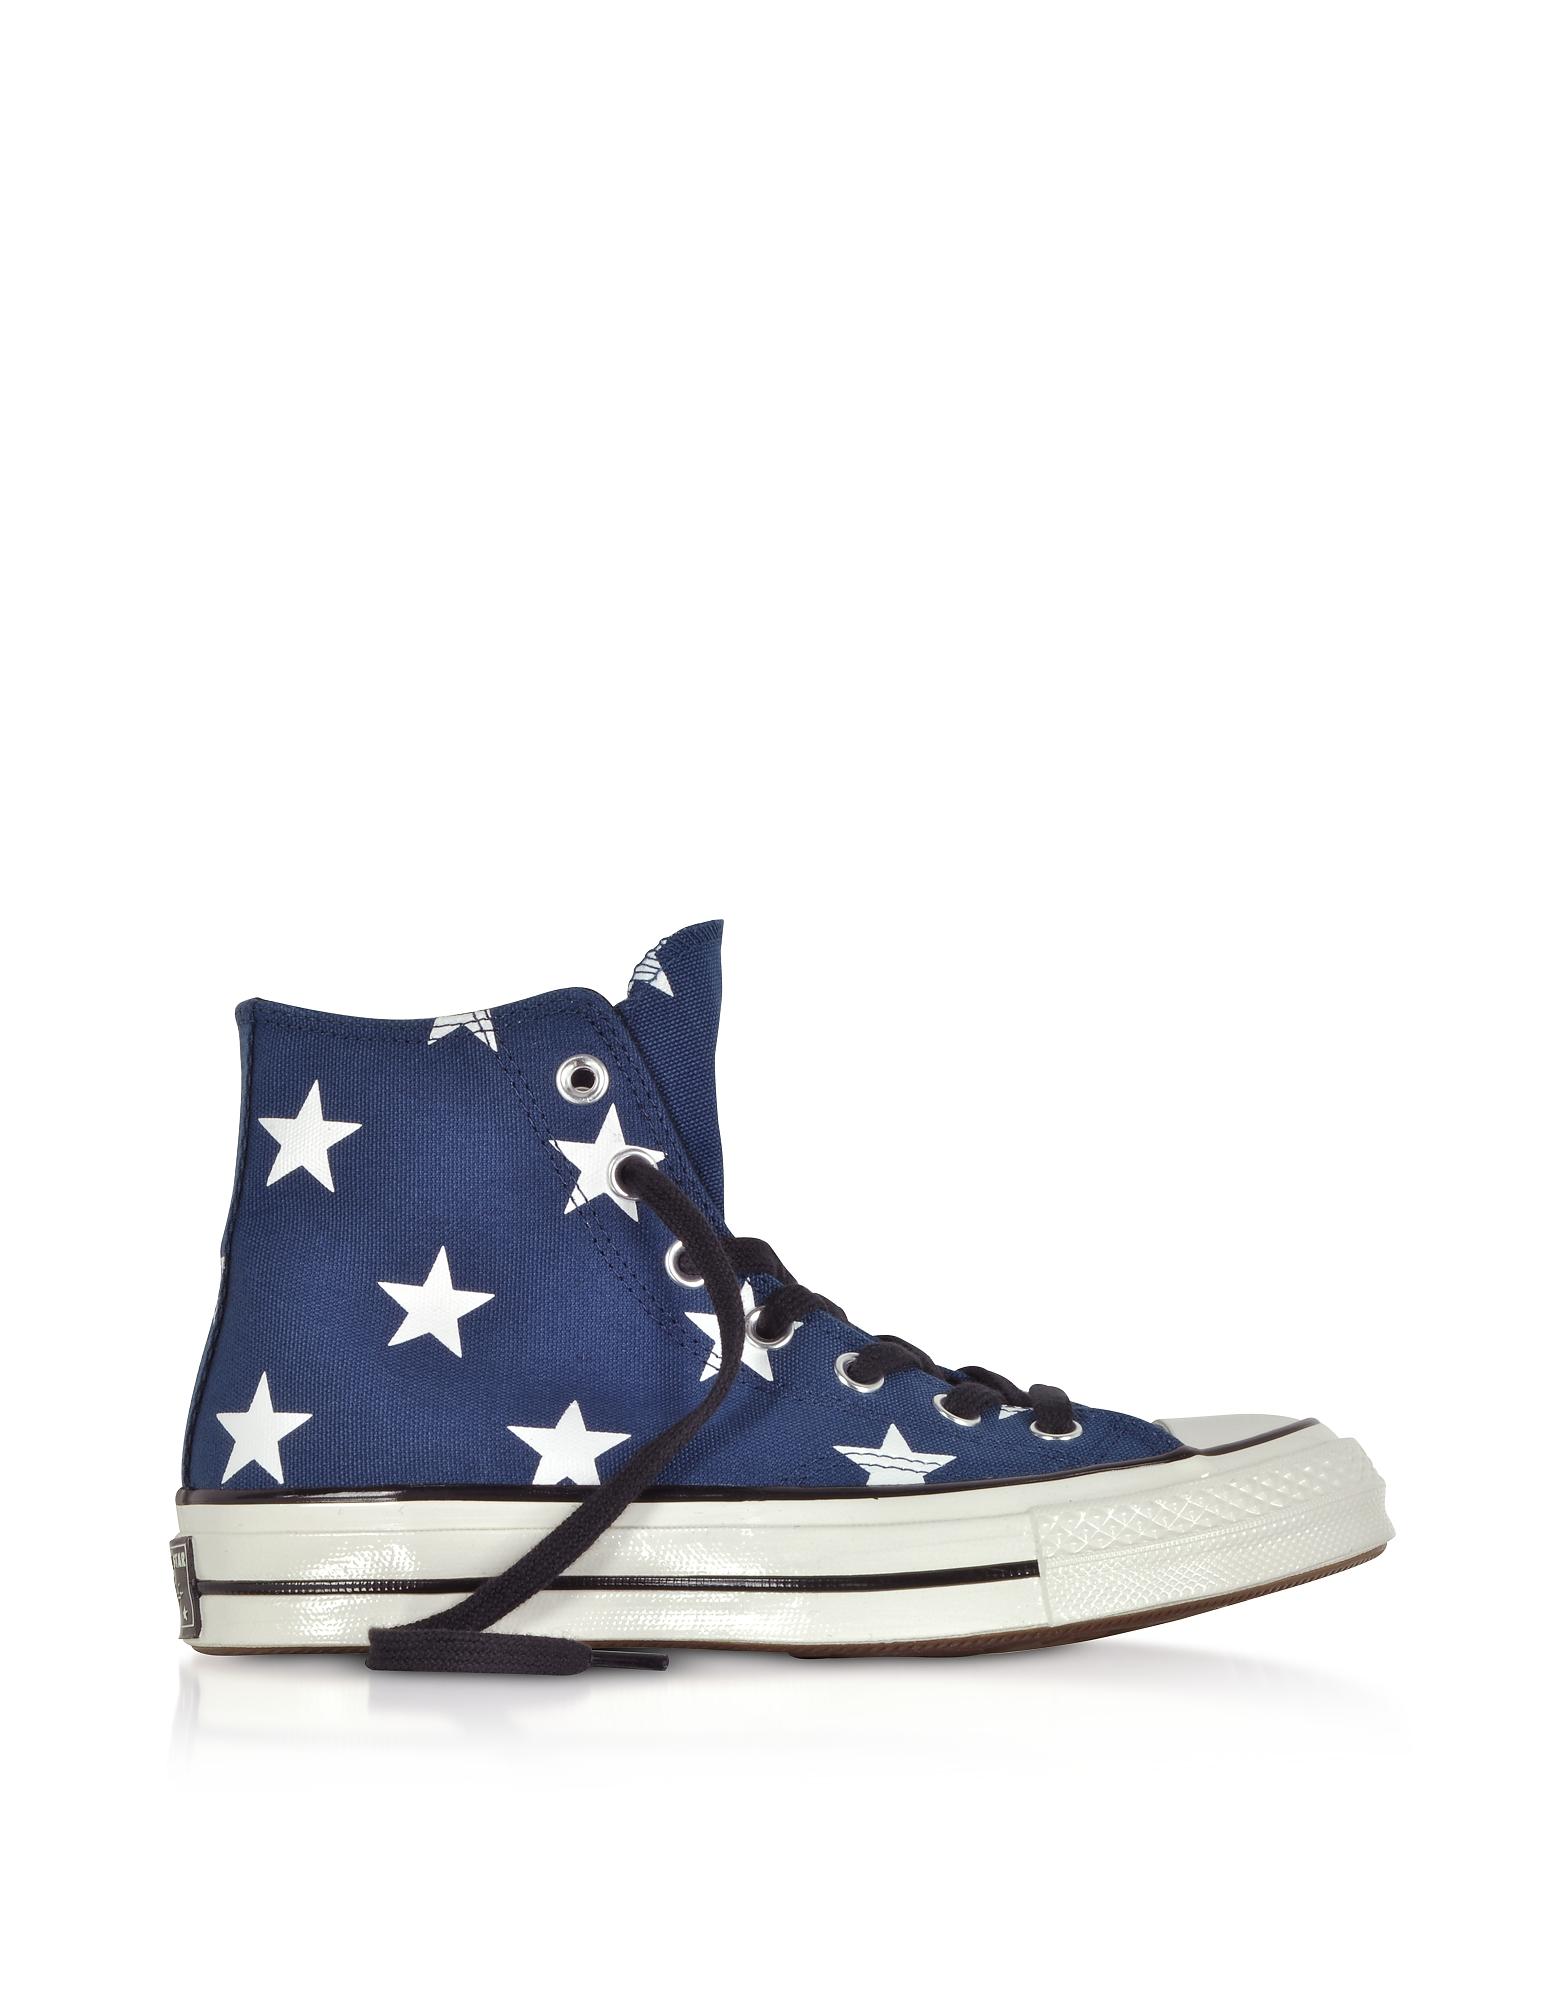 converse sneakers navy blue